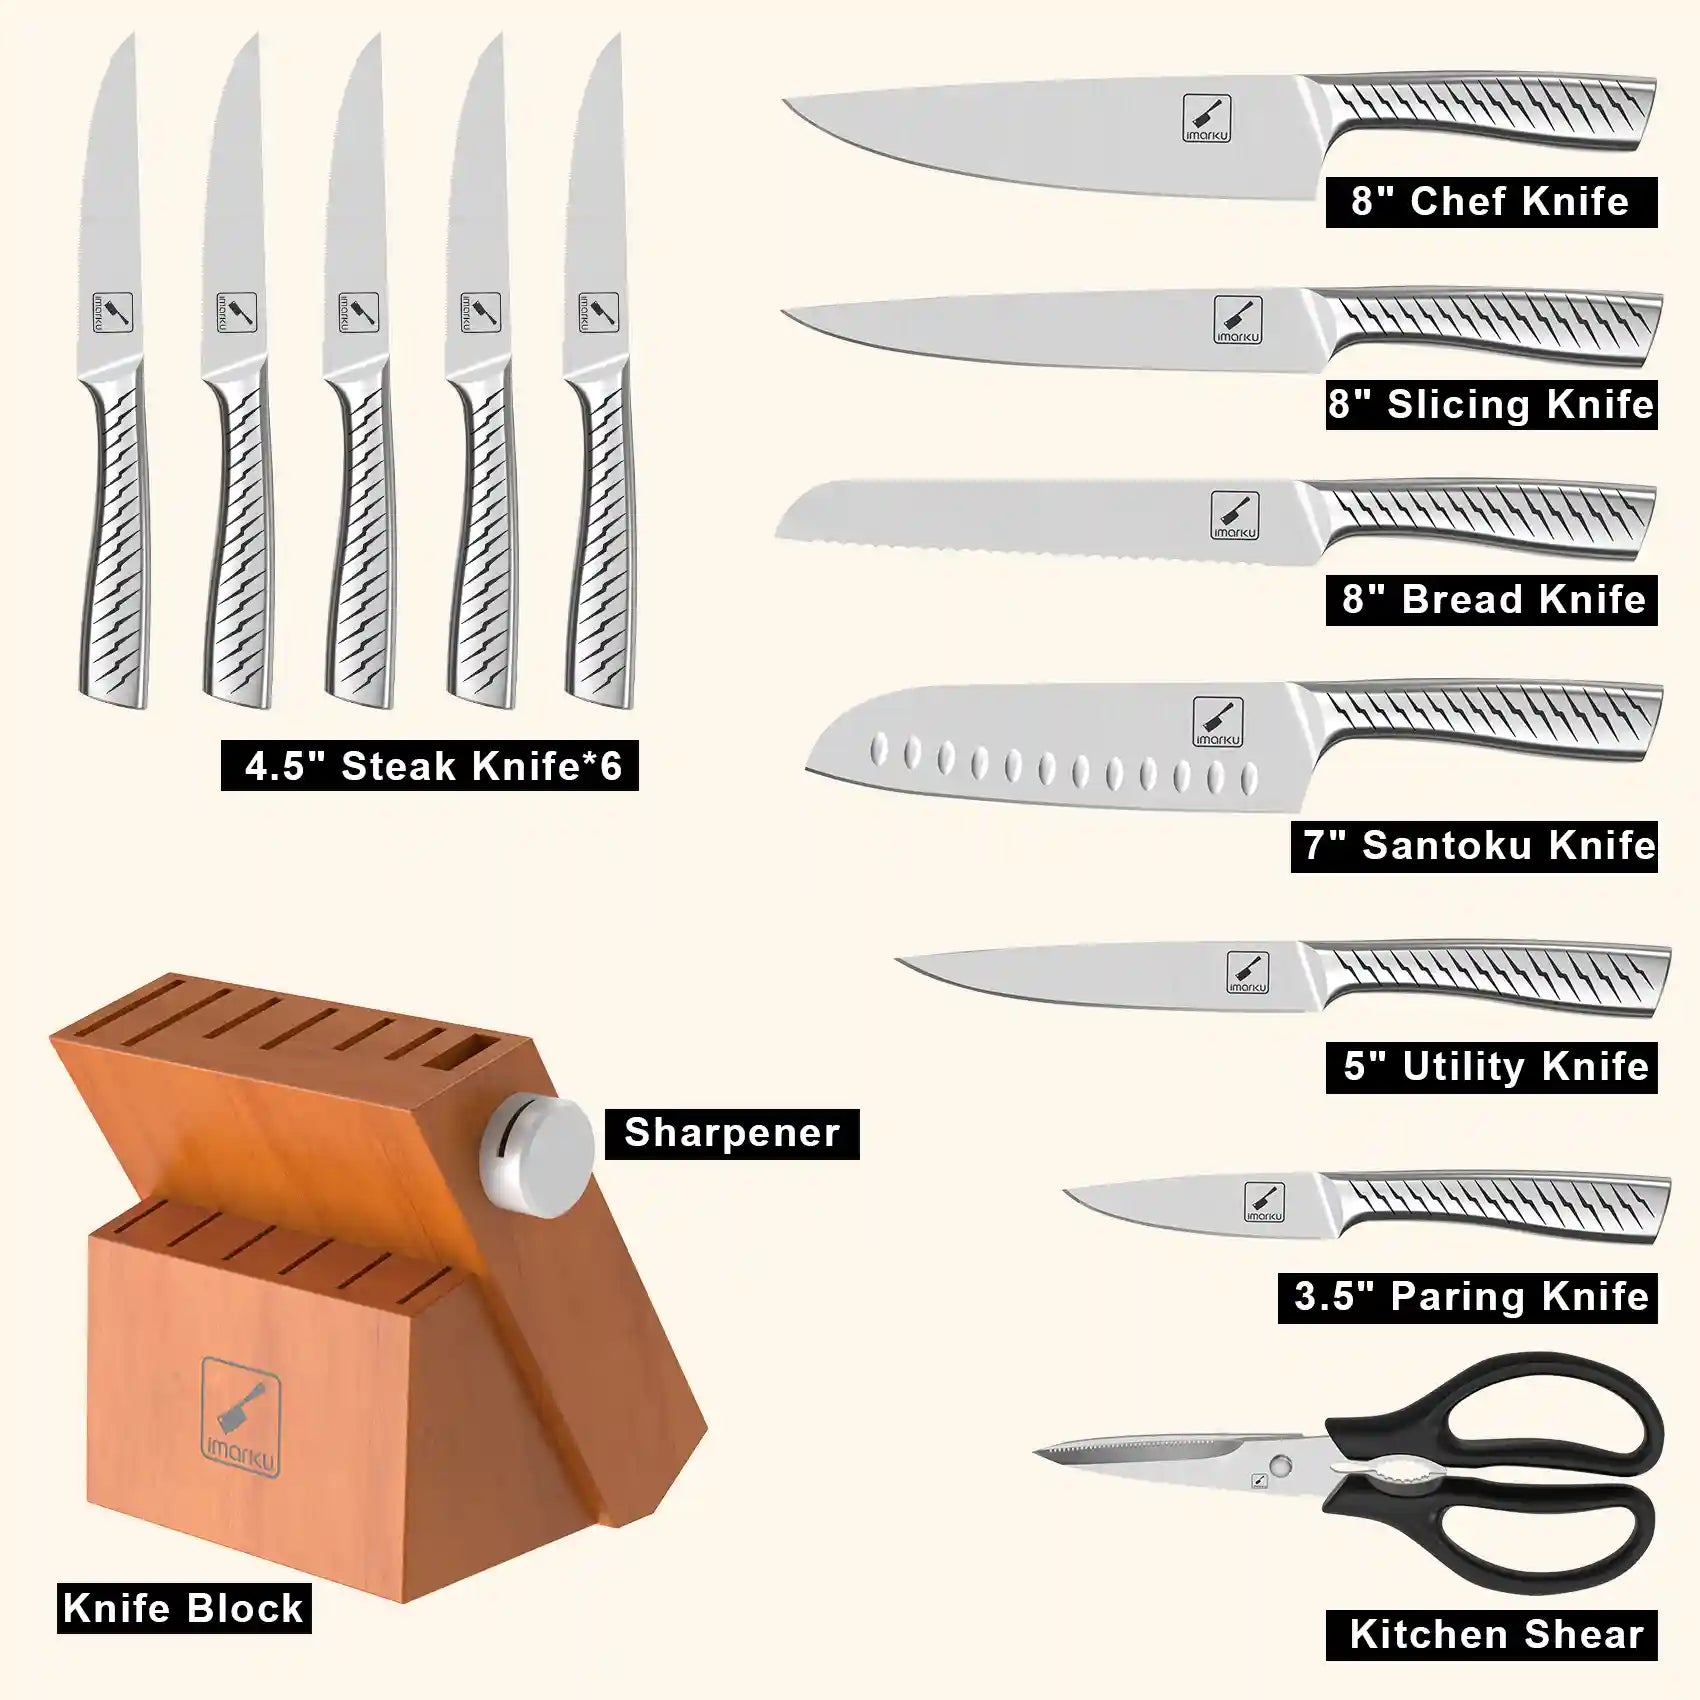 Say Goodbye to Rust with Our Rust-resistant Knife Set - IMARKU